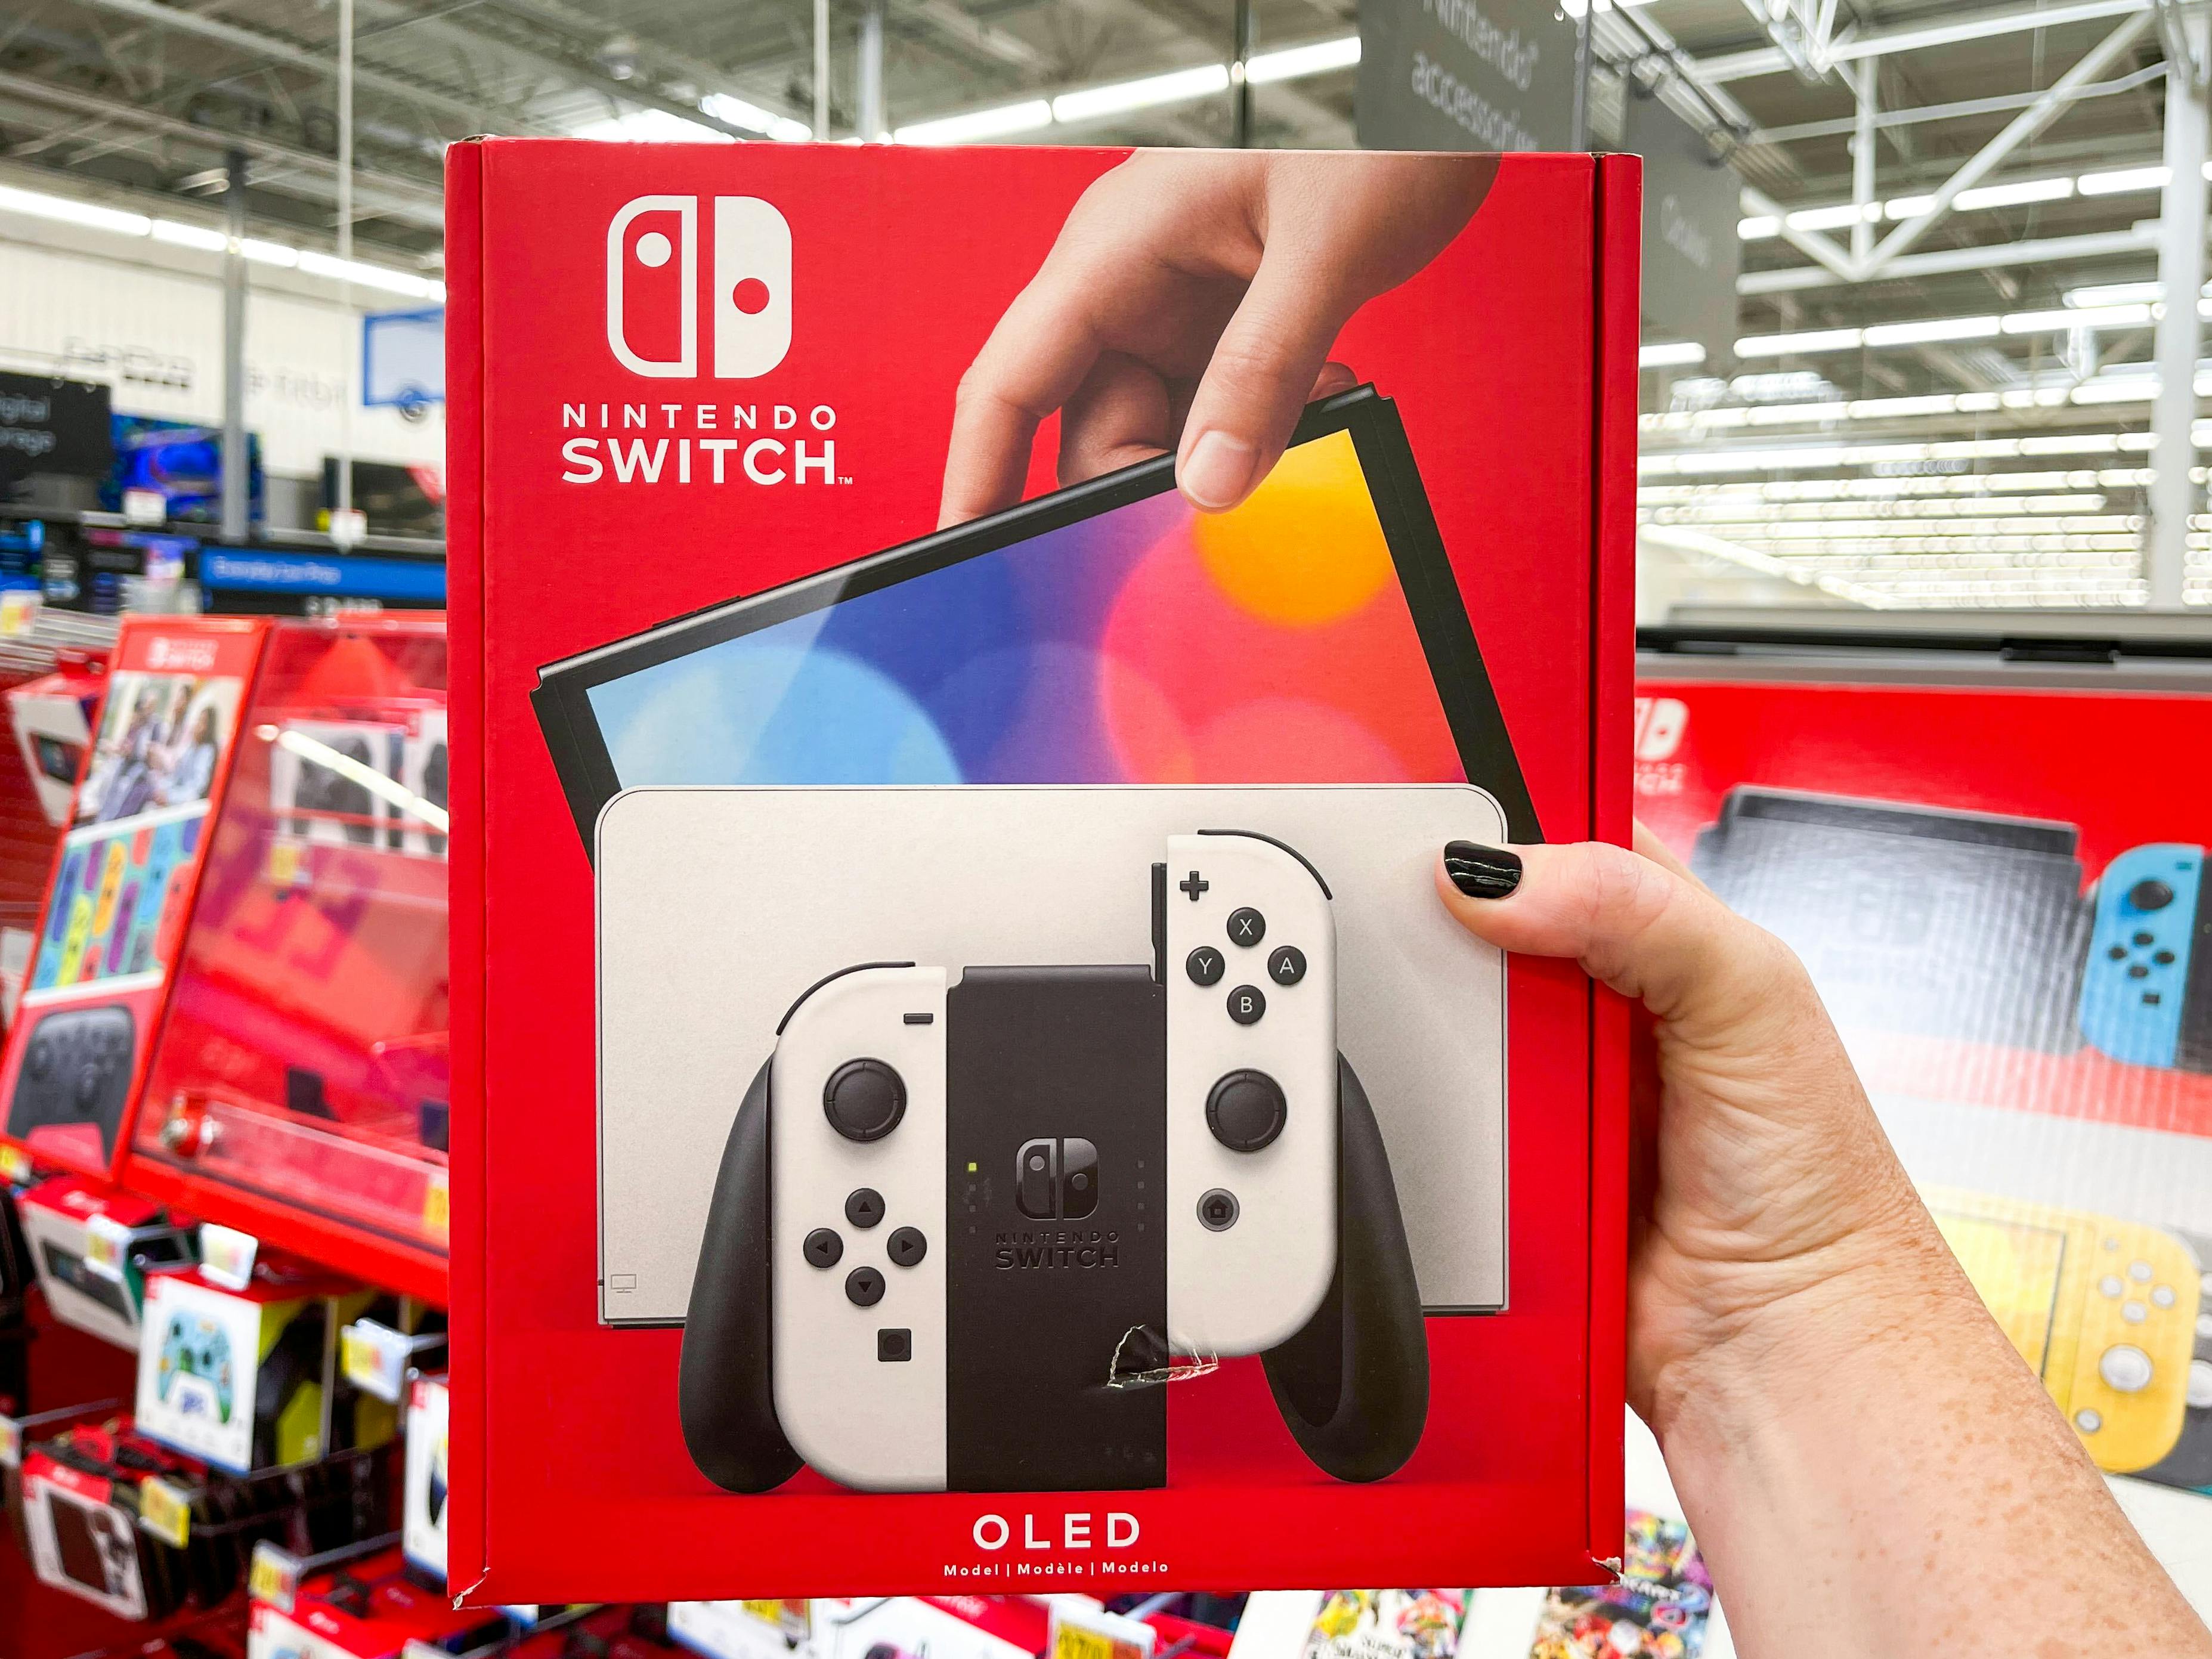 A person holding up a Nintendo Switch OLED in the Nintendo video game aisle.